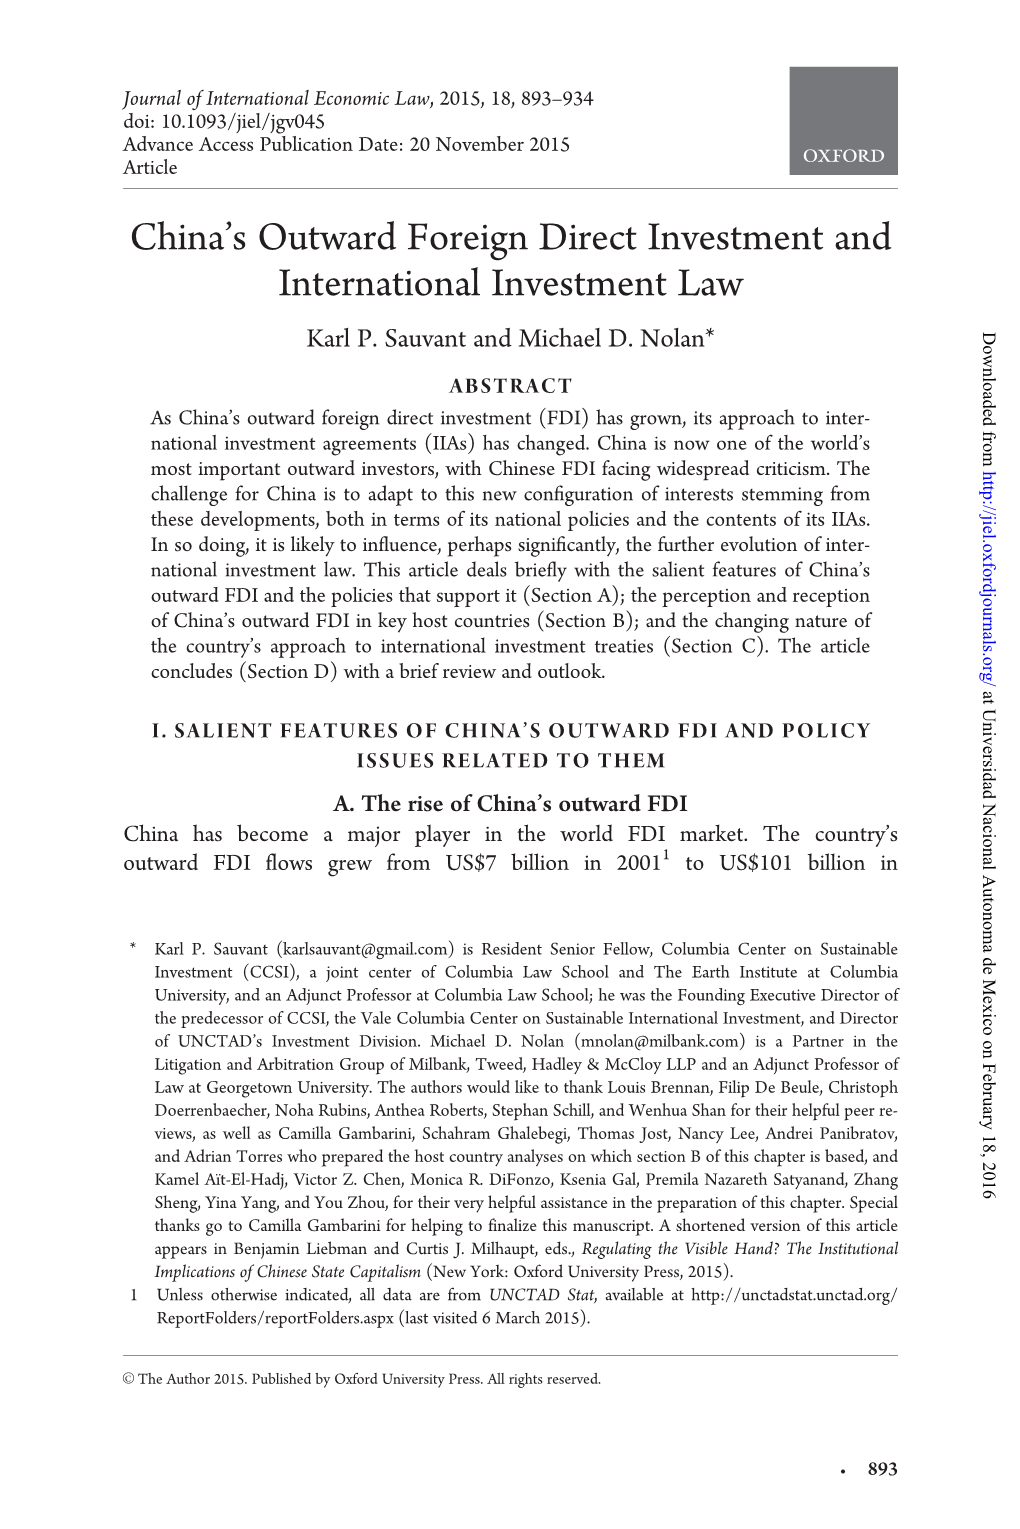 China's Outward Foreign Direct Investment and International